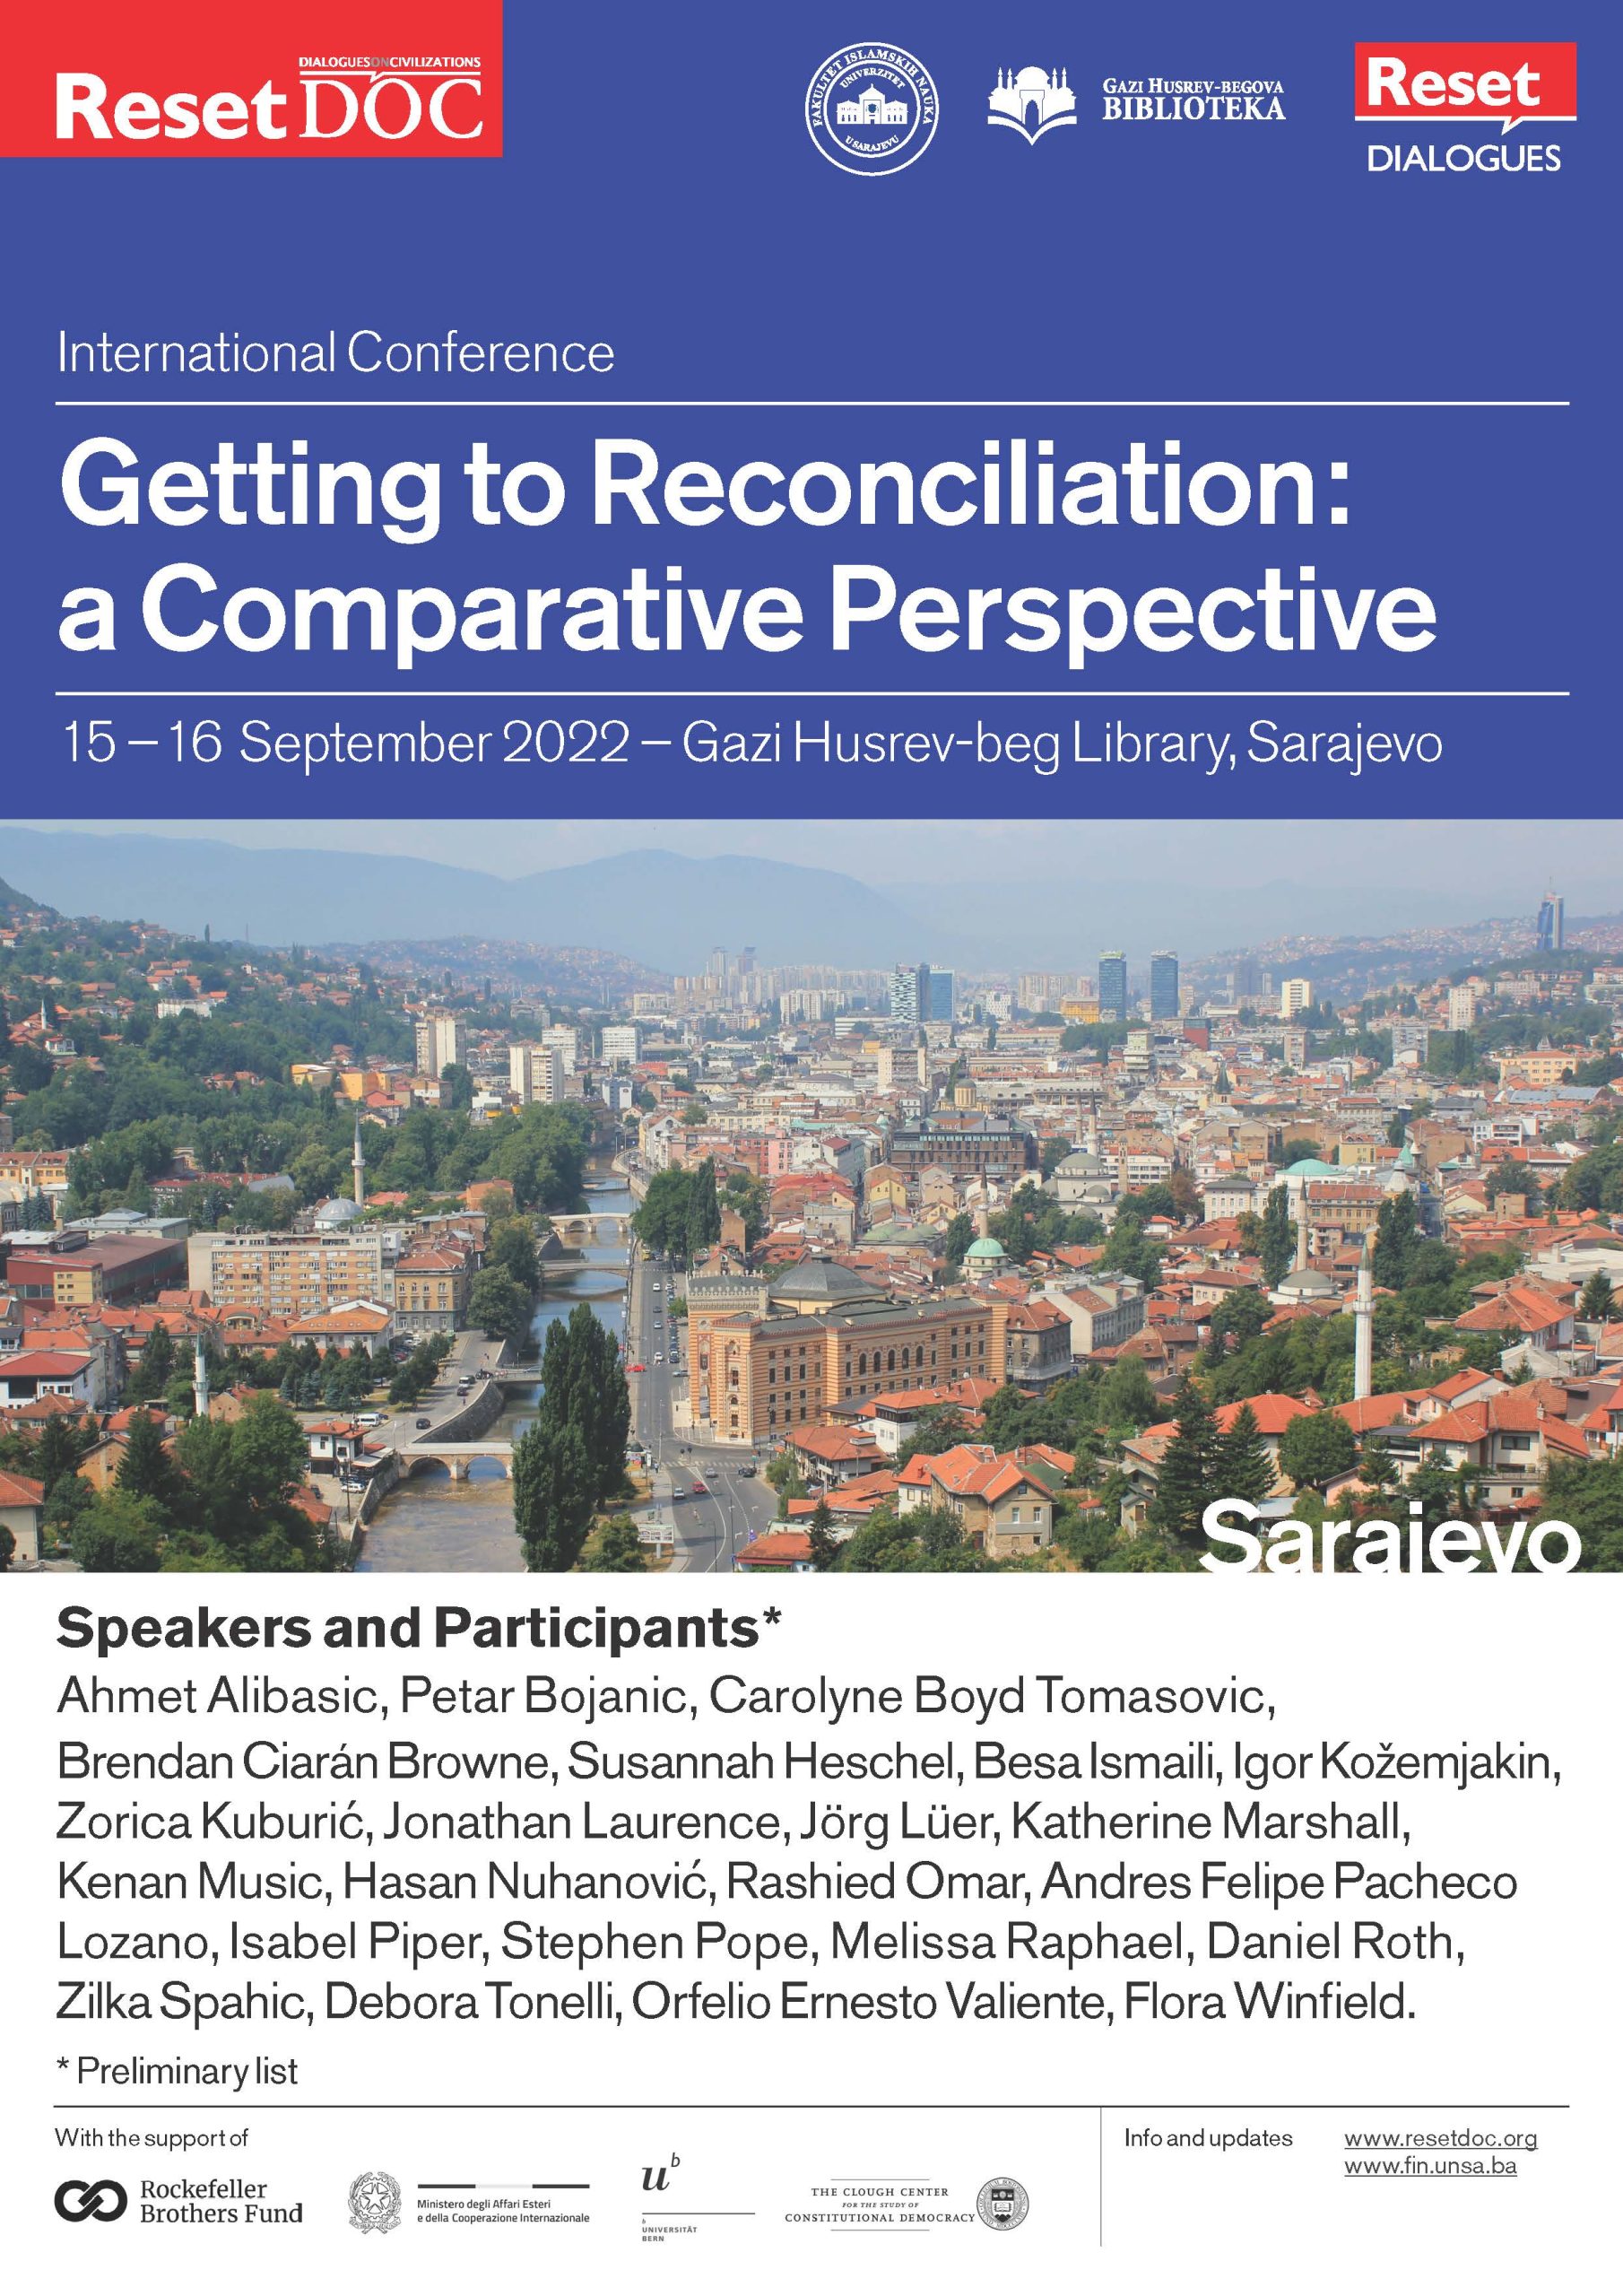 International Conference: “Getting to Reconciliation: a Comparative Perspective”